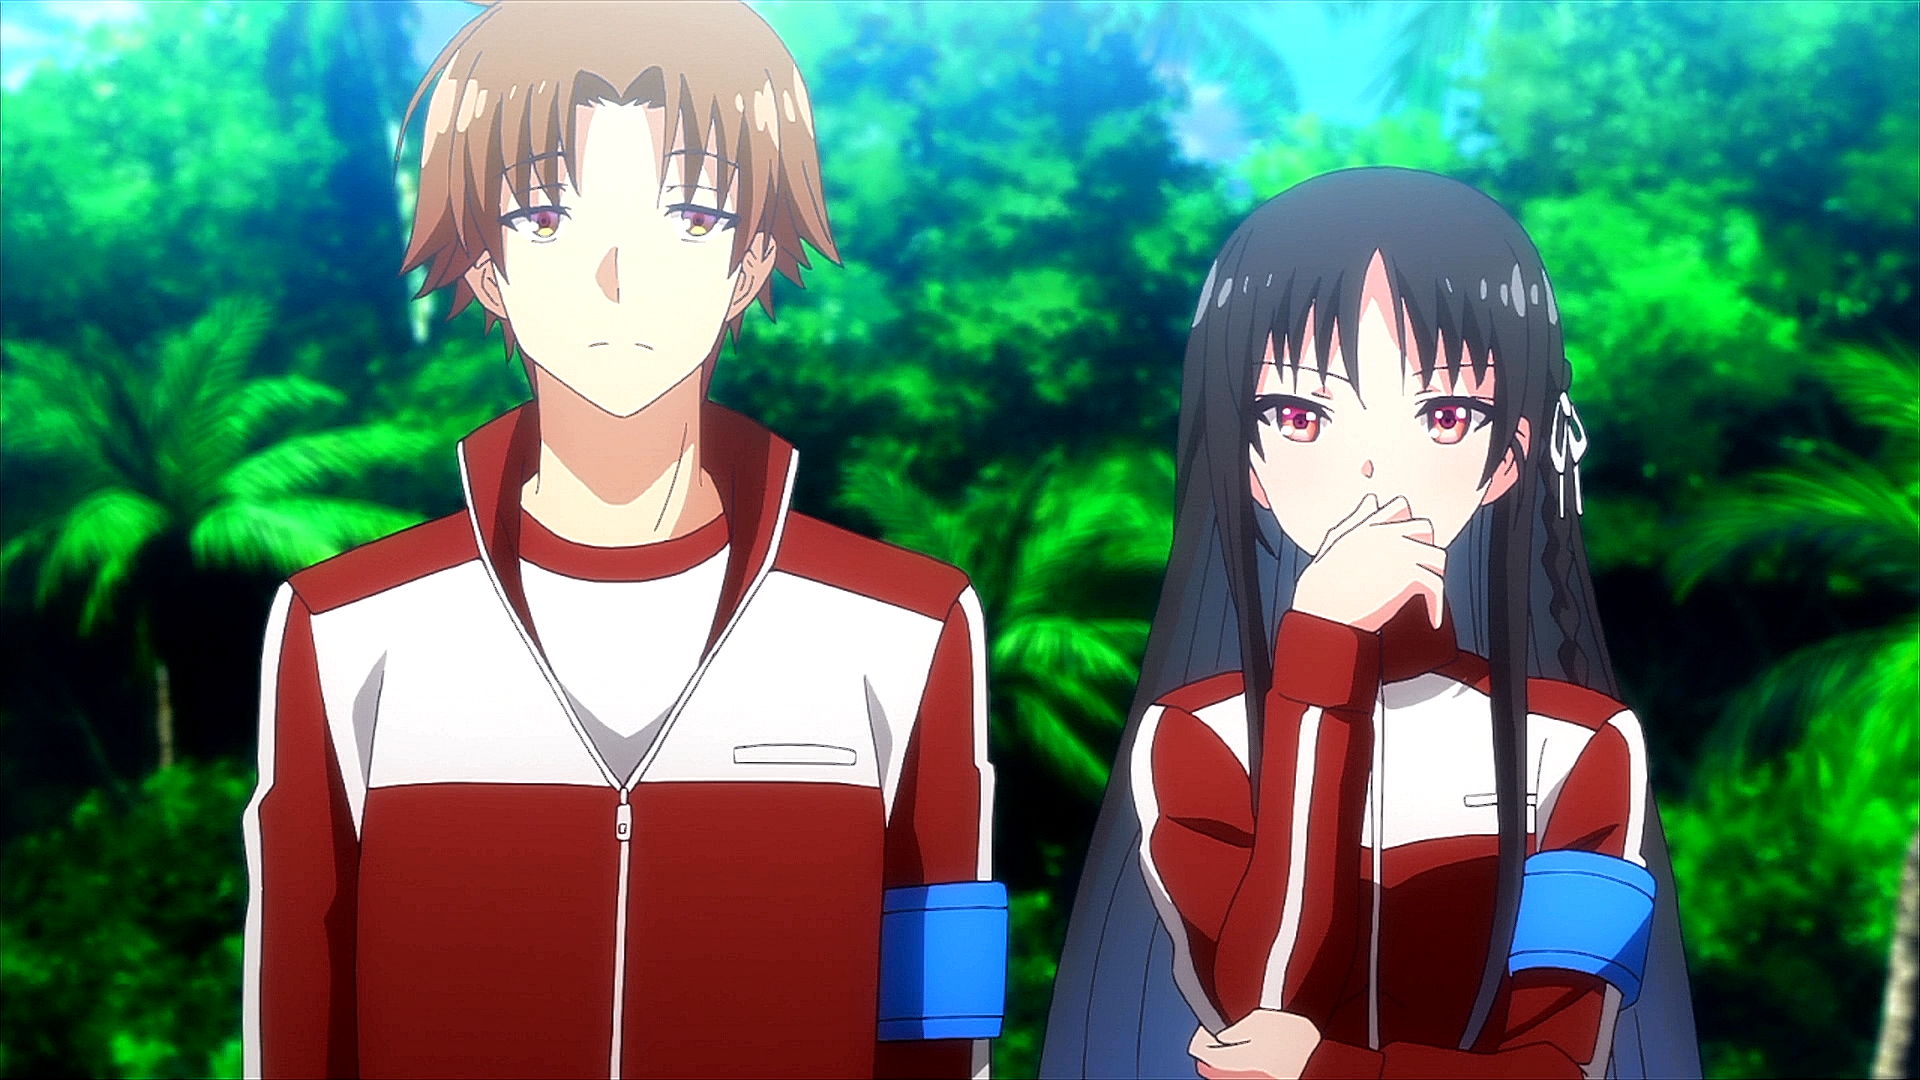 Ayanokoji Gets called by his first name by future girlfriend kei #CapC